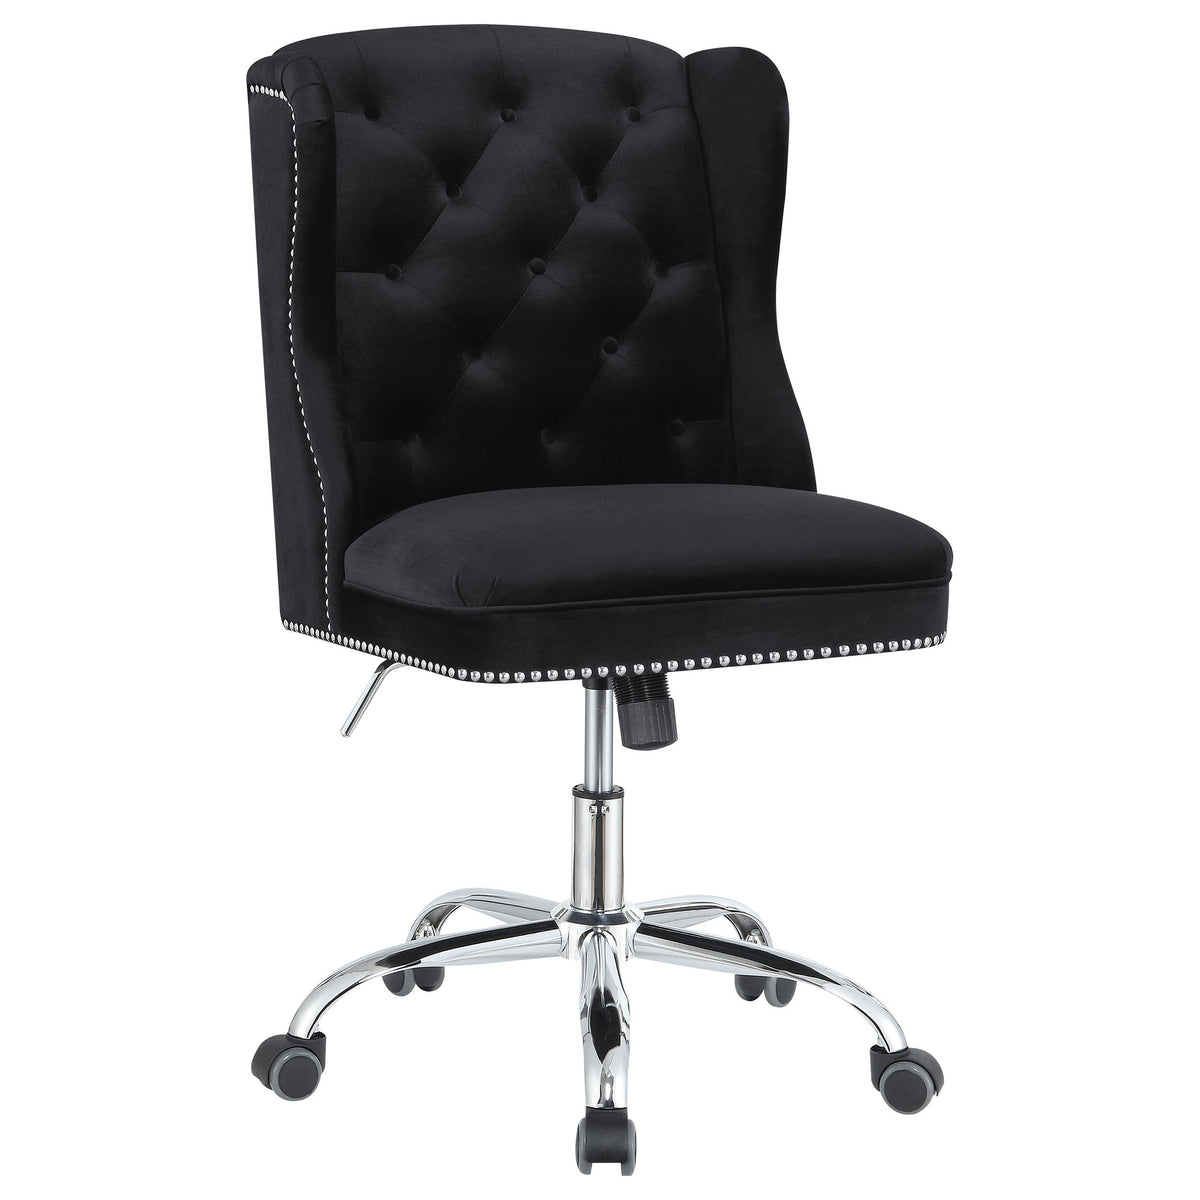 Julius Upholstered Tufted Office Chair Black and Chrome  Half Price Furniture